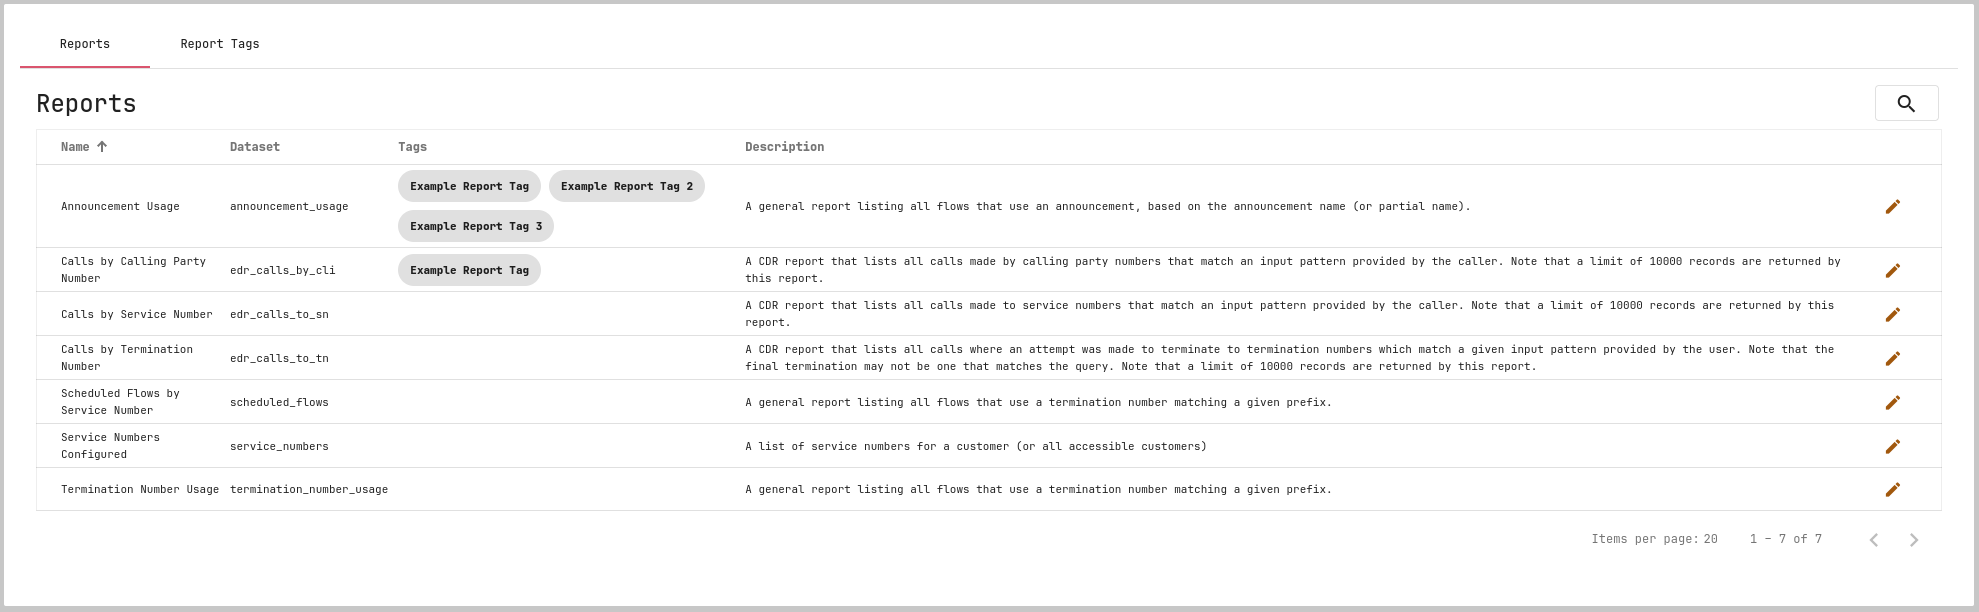 reports list within the admin gui